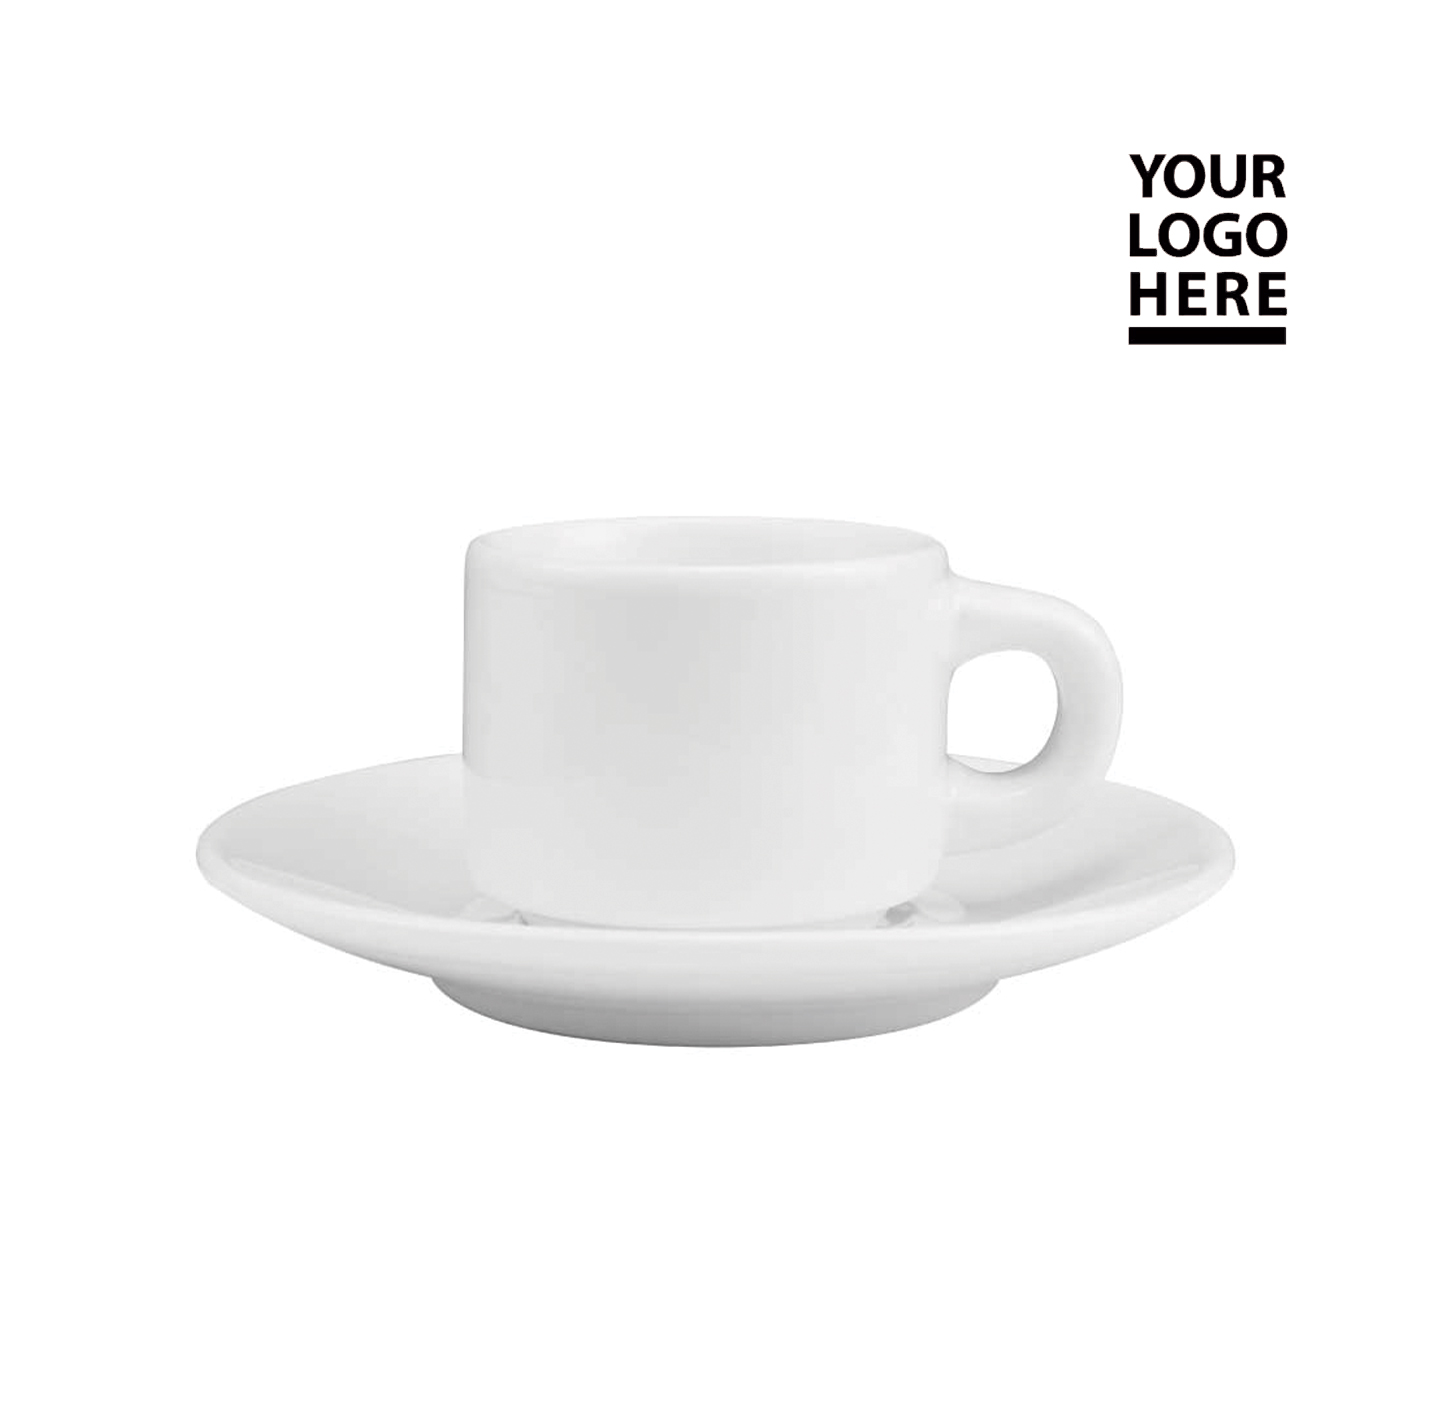 Sublimation White Ceramic Cup & Saucer 77ml